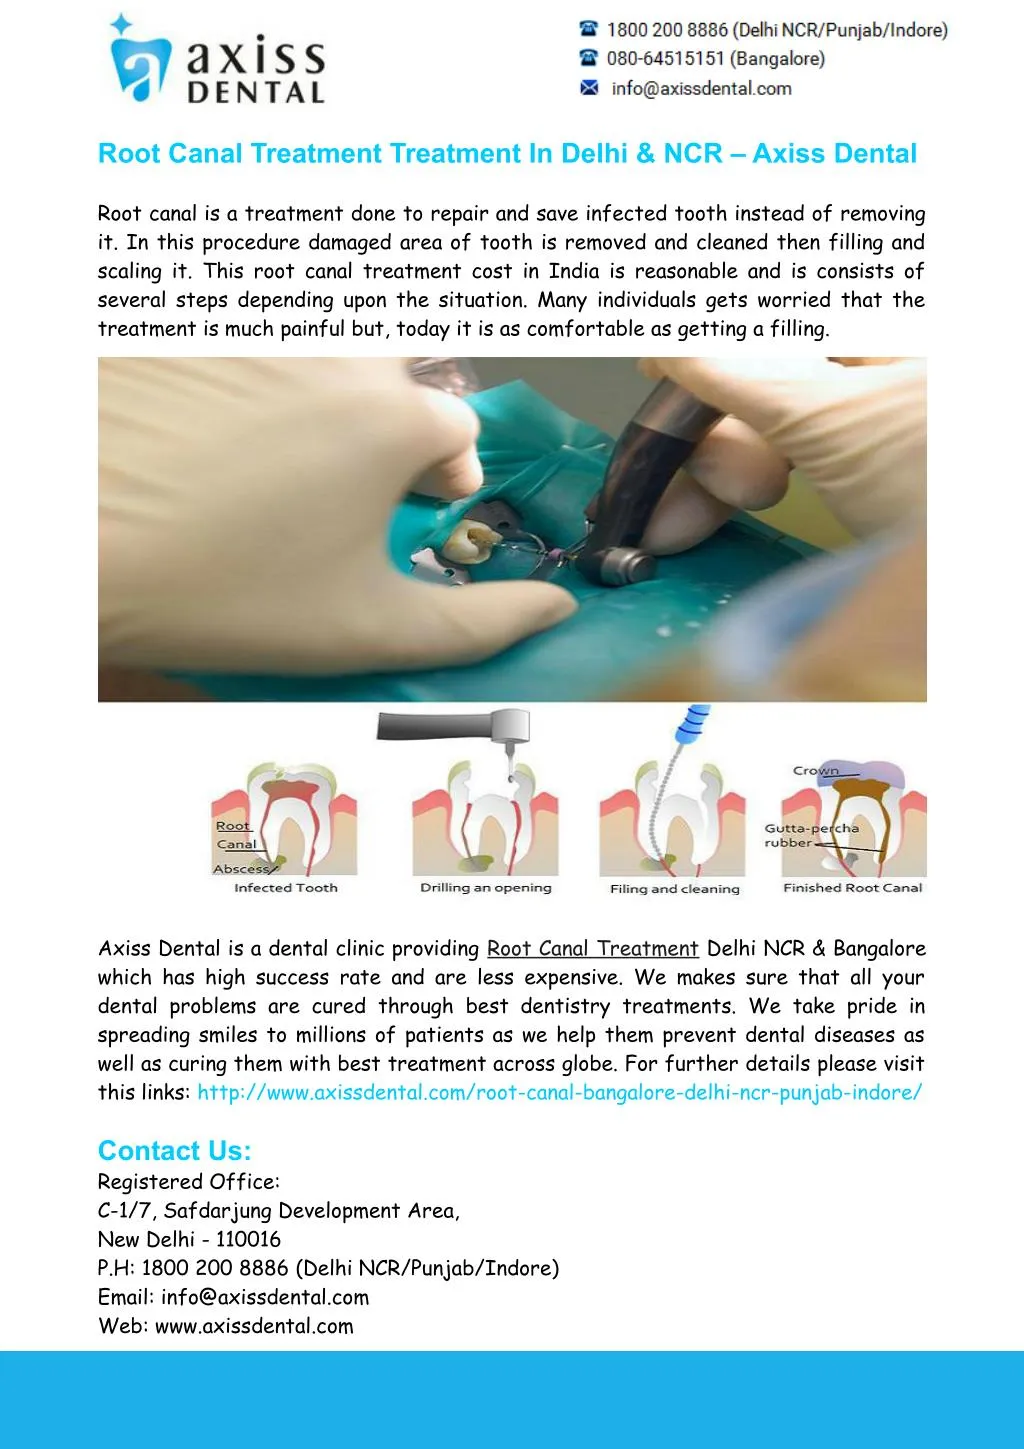 root canal treatment treatment in delhi ncr axiss